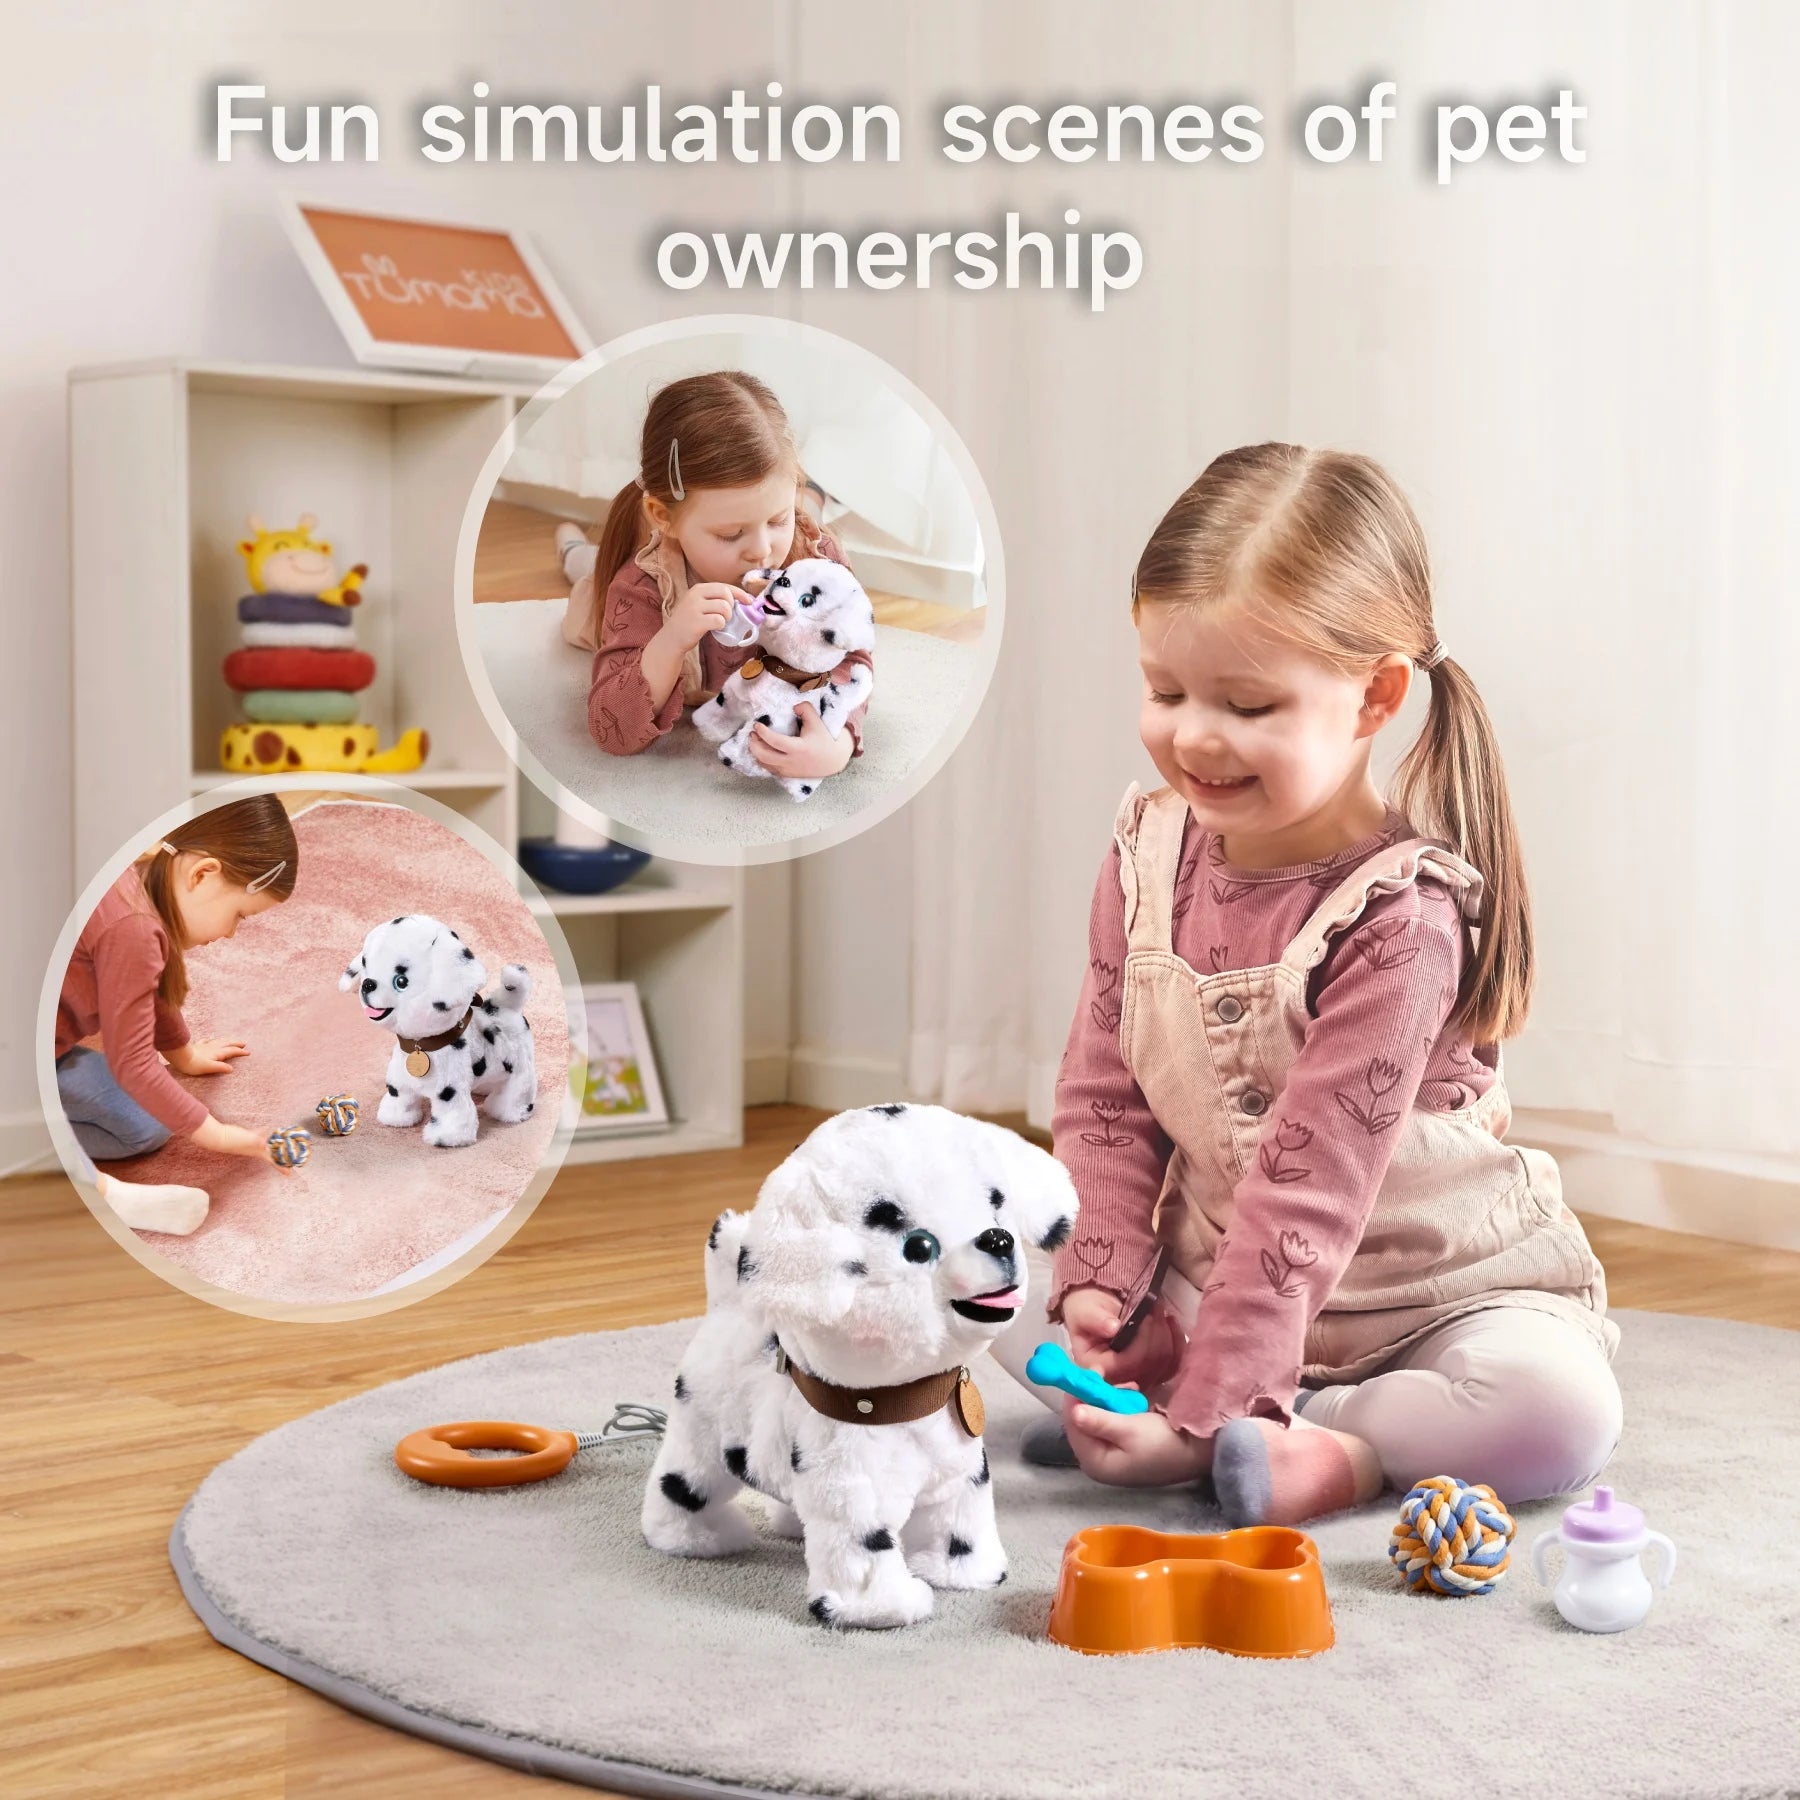 Realistic dog toy set with walking, barking, and singing features